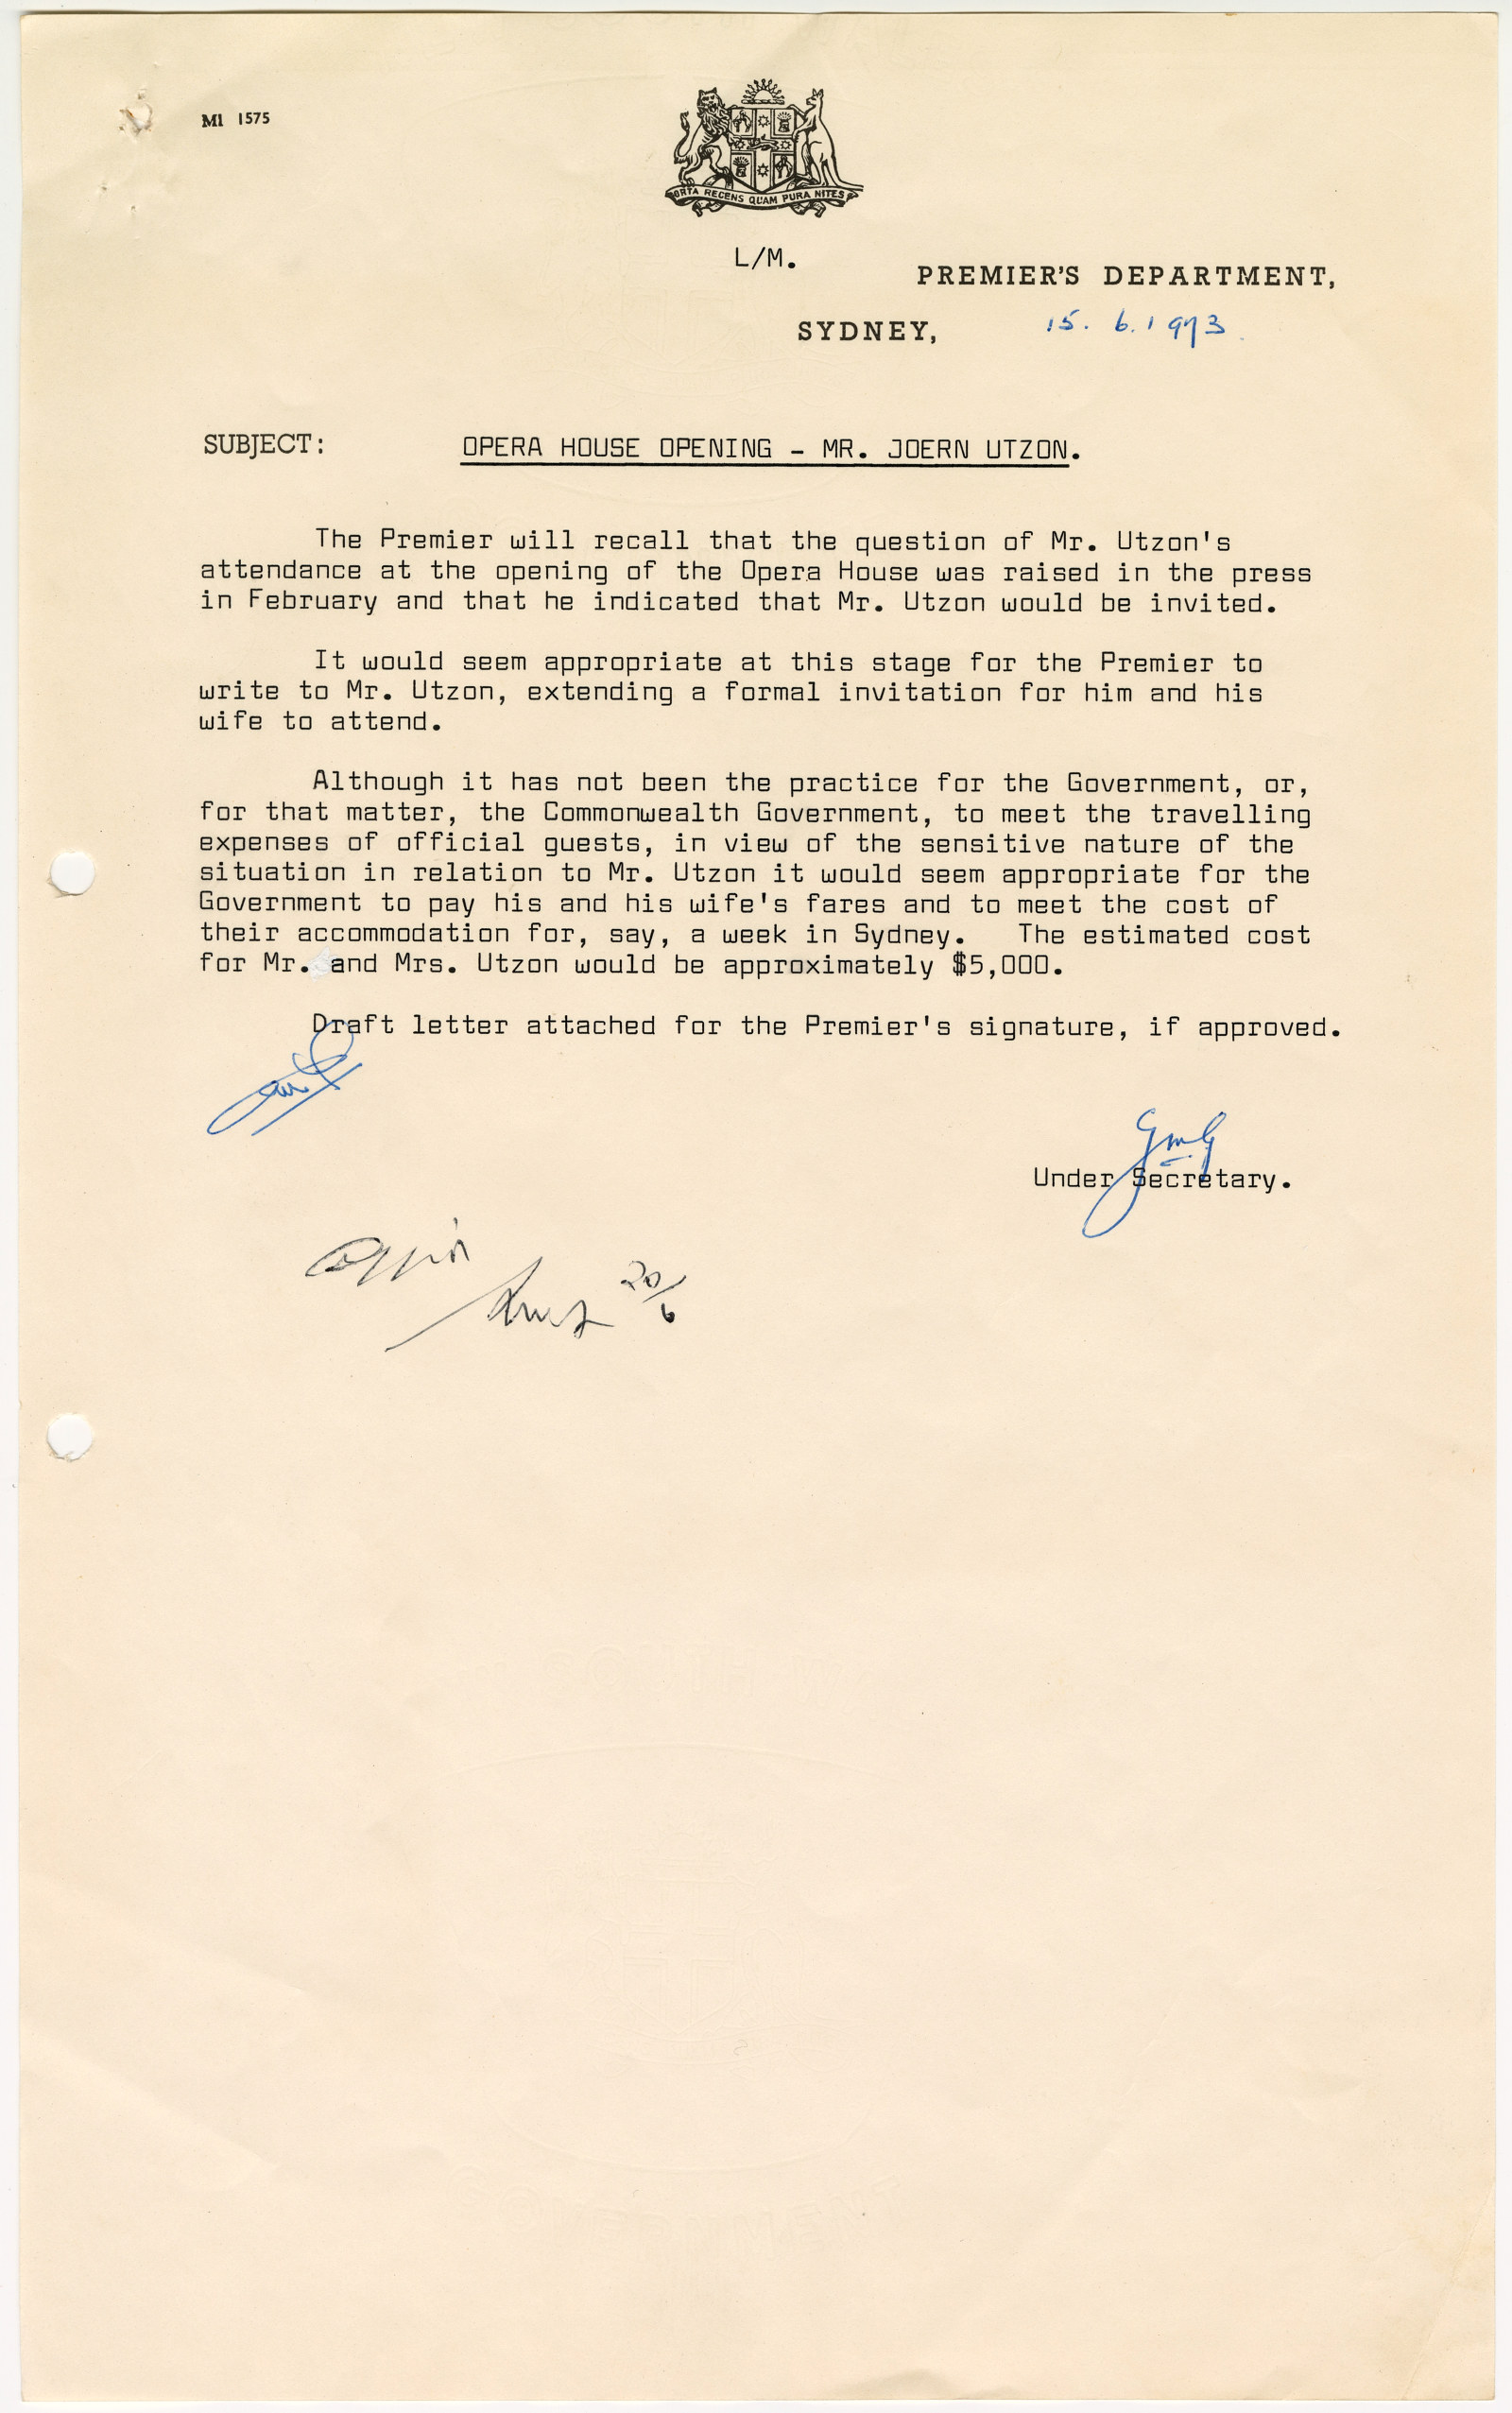 Memo dated 15 June, 1973, from Under Secrerary Sir George Gray to Premier Askin regarding an invitation for Jørn and Lis Utzon to attend the Sydney Opera House opening. NRS-12092-52-10-72_1214_001_1 - Utzon p1